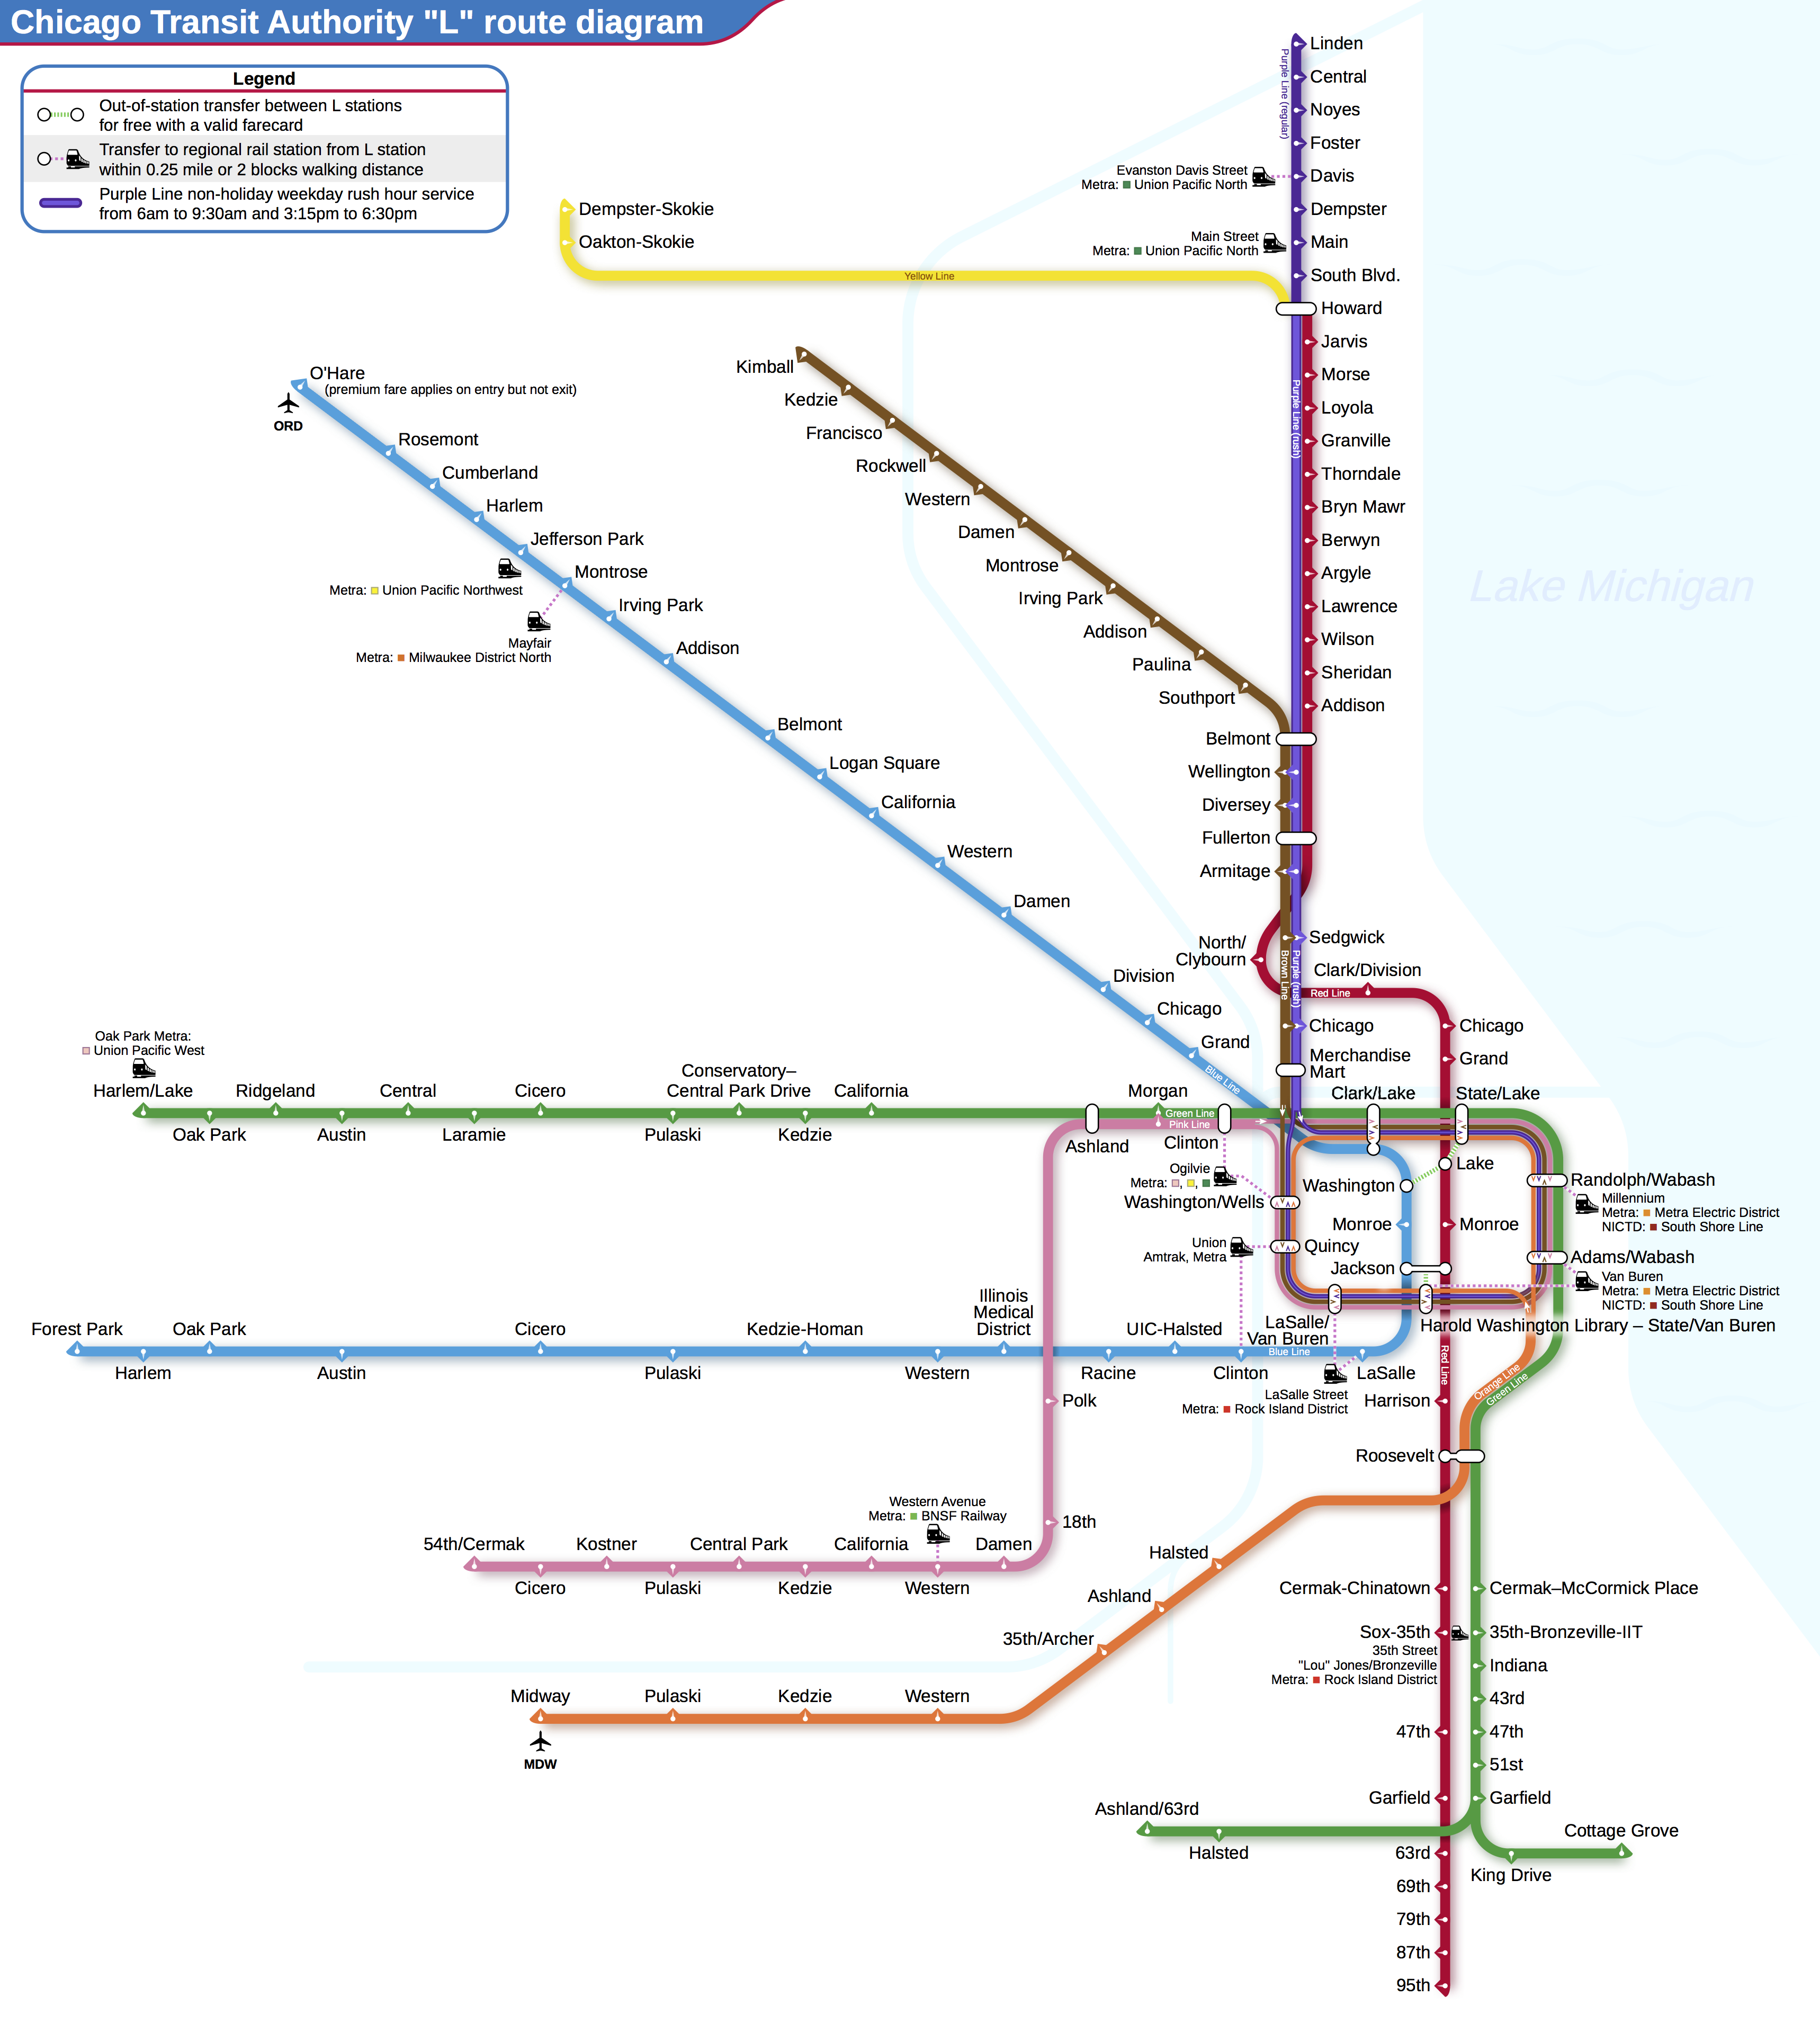 Chicago Transit Authority 'L' map.  For this illustration, we are interesting in predicting the ridership at the Clark/Lake station in the Chicago Loop. (Source: Wikimedia Commons,  Creative Commons license)